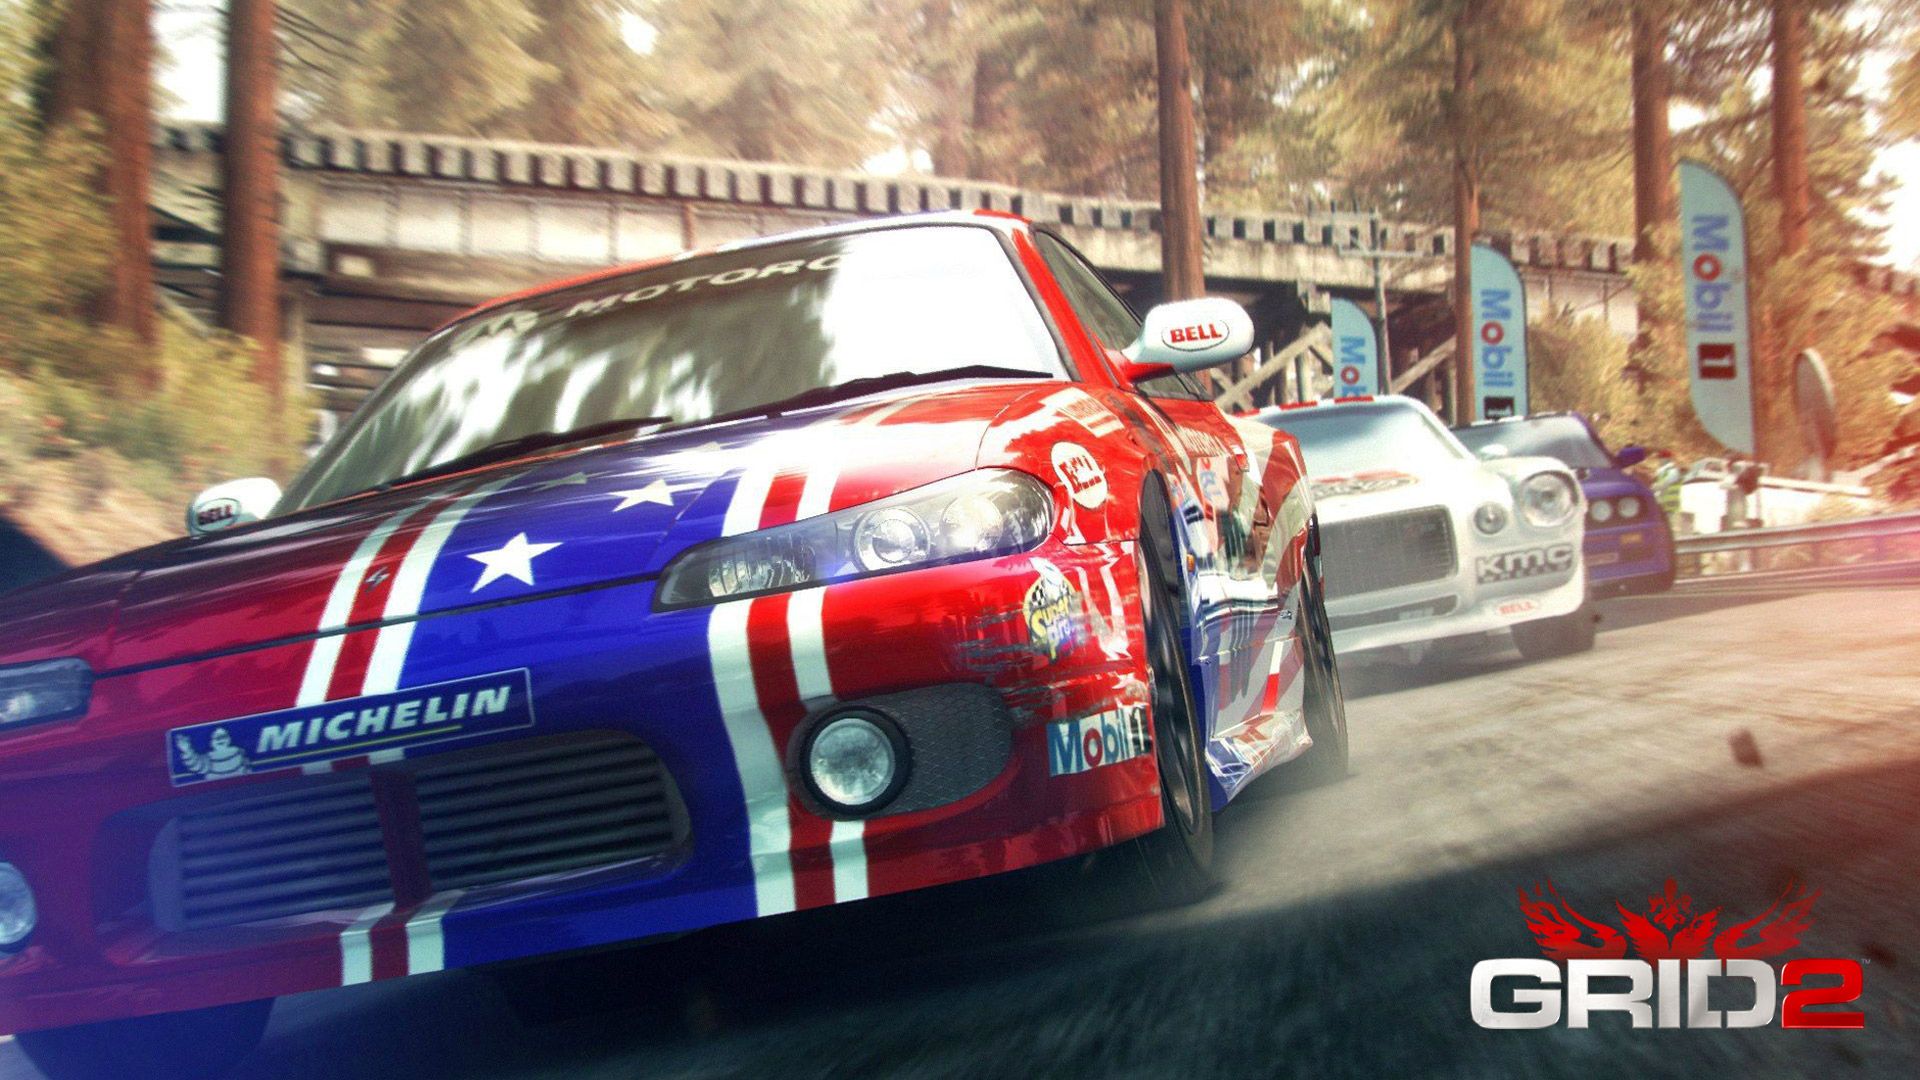 GRID 2 Wallpapers in 1920x1080